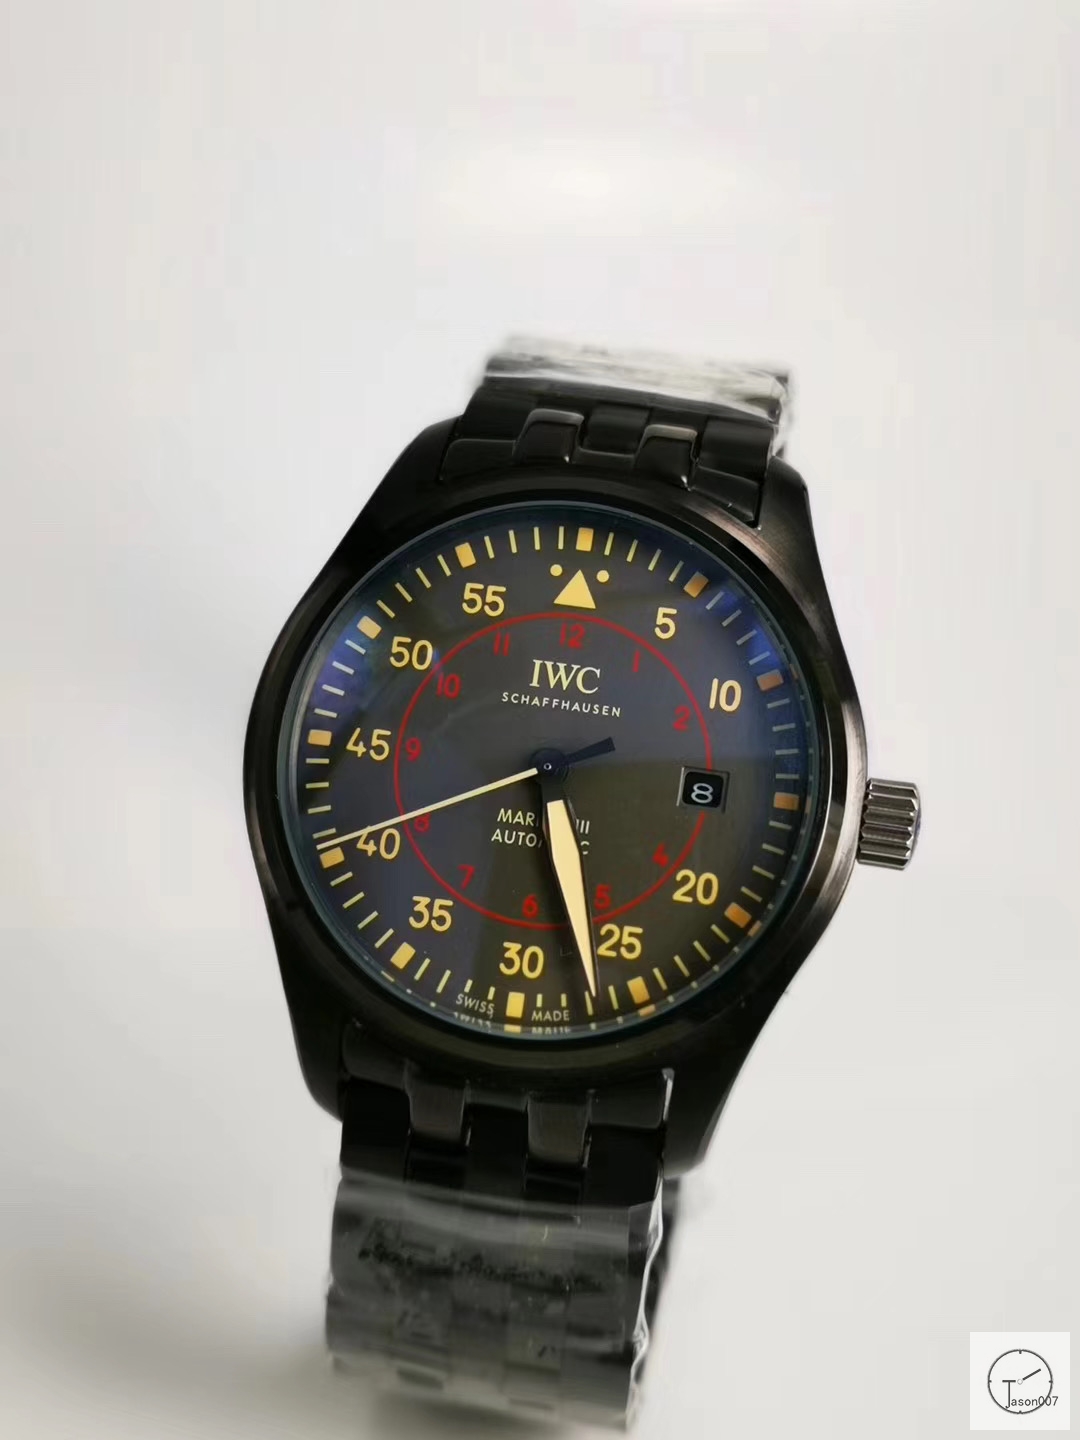 IWC PILOT'S SCHAFFHAUSEN Brown Dial SPITFIRE Mark XV2 WATCH AUTOMATIC SPITFIRE AUTOMATIC Mechical IW326801 42MM Stainless Steel Leather Strap Mens Wristwatches ICW22640560